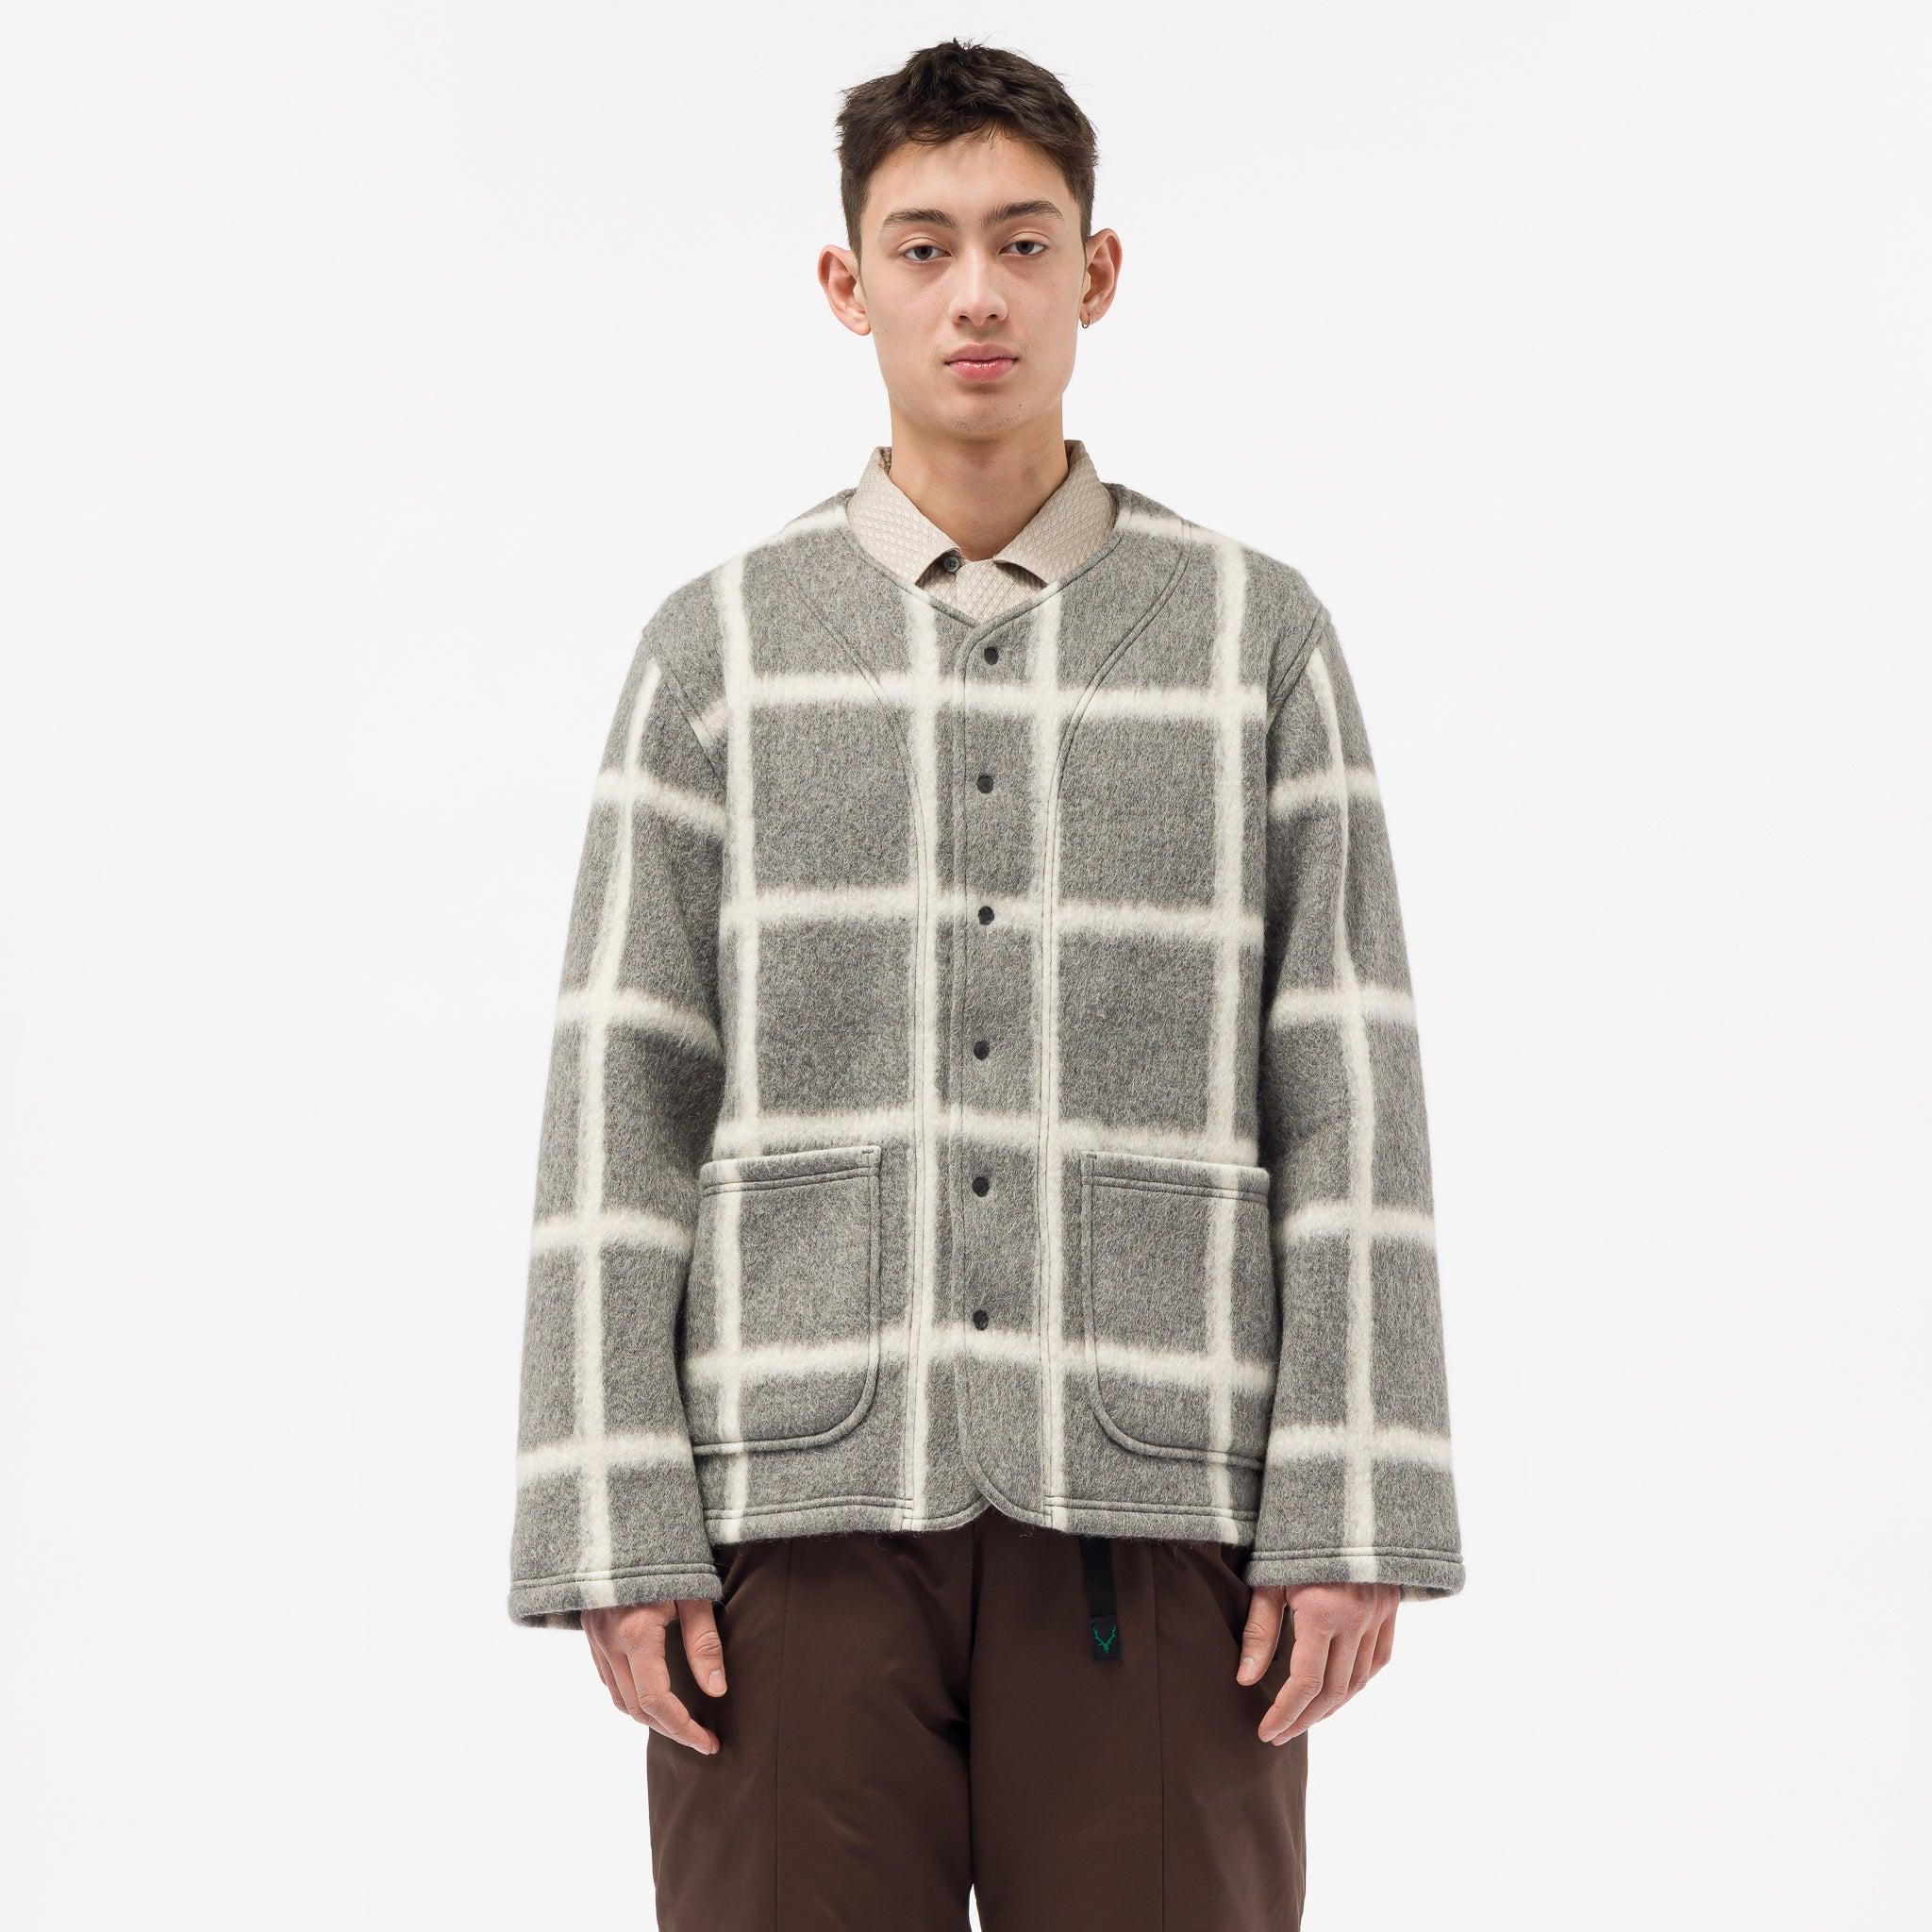 South2West8 Boiled Wool Jacket - アウター